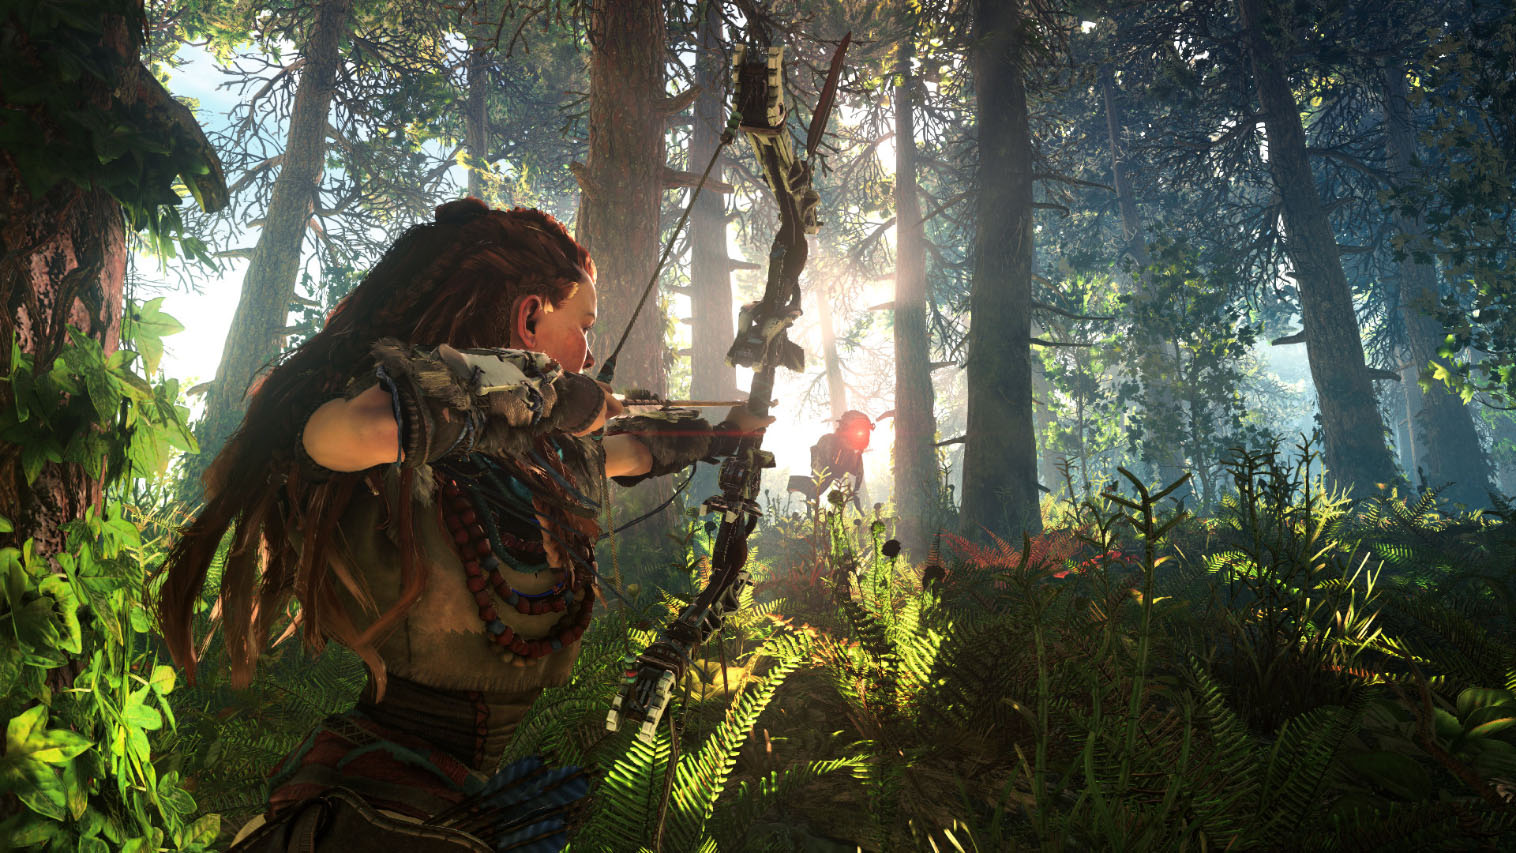 Horizon Zero Dawn’s main character, Aloy, targets a Watcher, a type of machine players battle in the open world RPG set in a post-apocalyptic future.